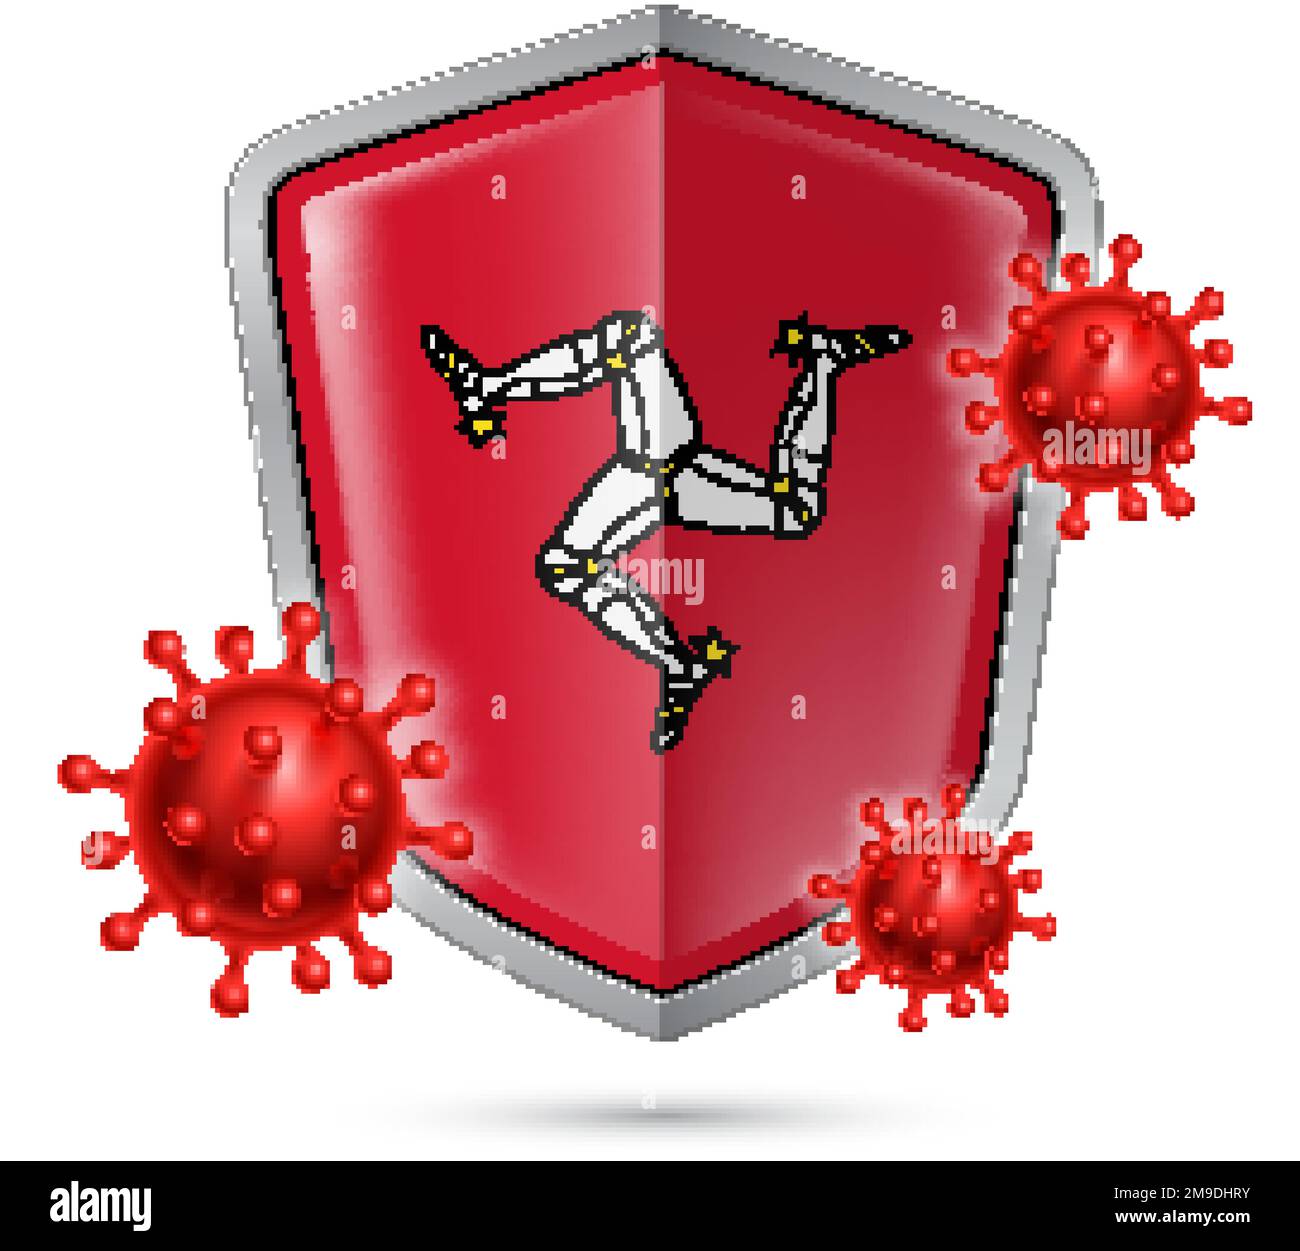 Flag of Isle of Man on Metal Shiny Shield Icon and Red Corona Virus Cells. Concept of Health Care and Safety Badge. Security Safeguard Metal Label wit Stock Vector